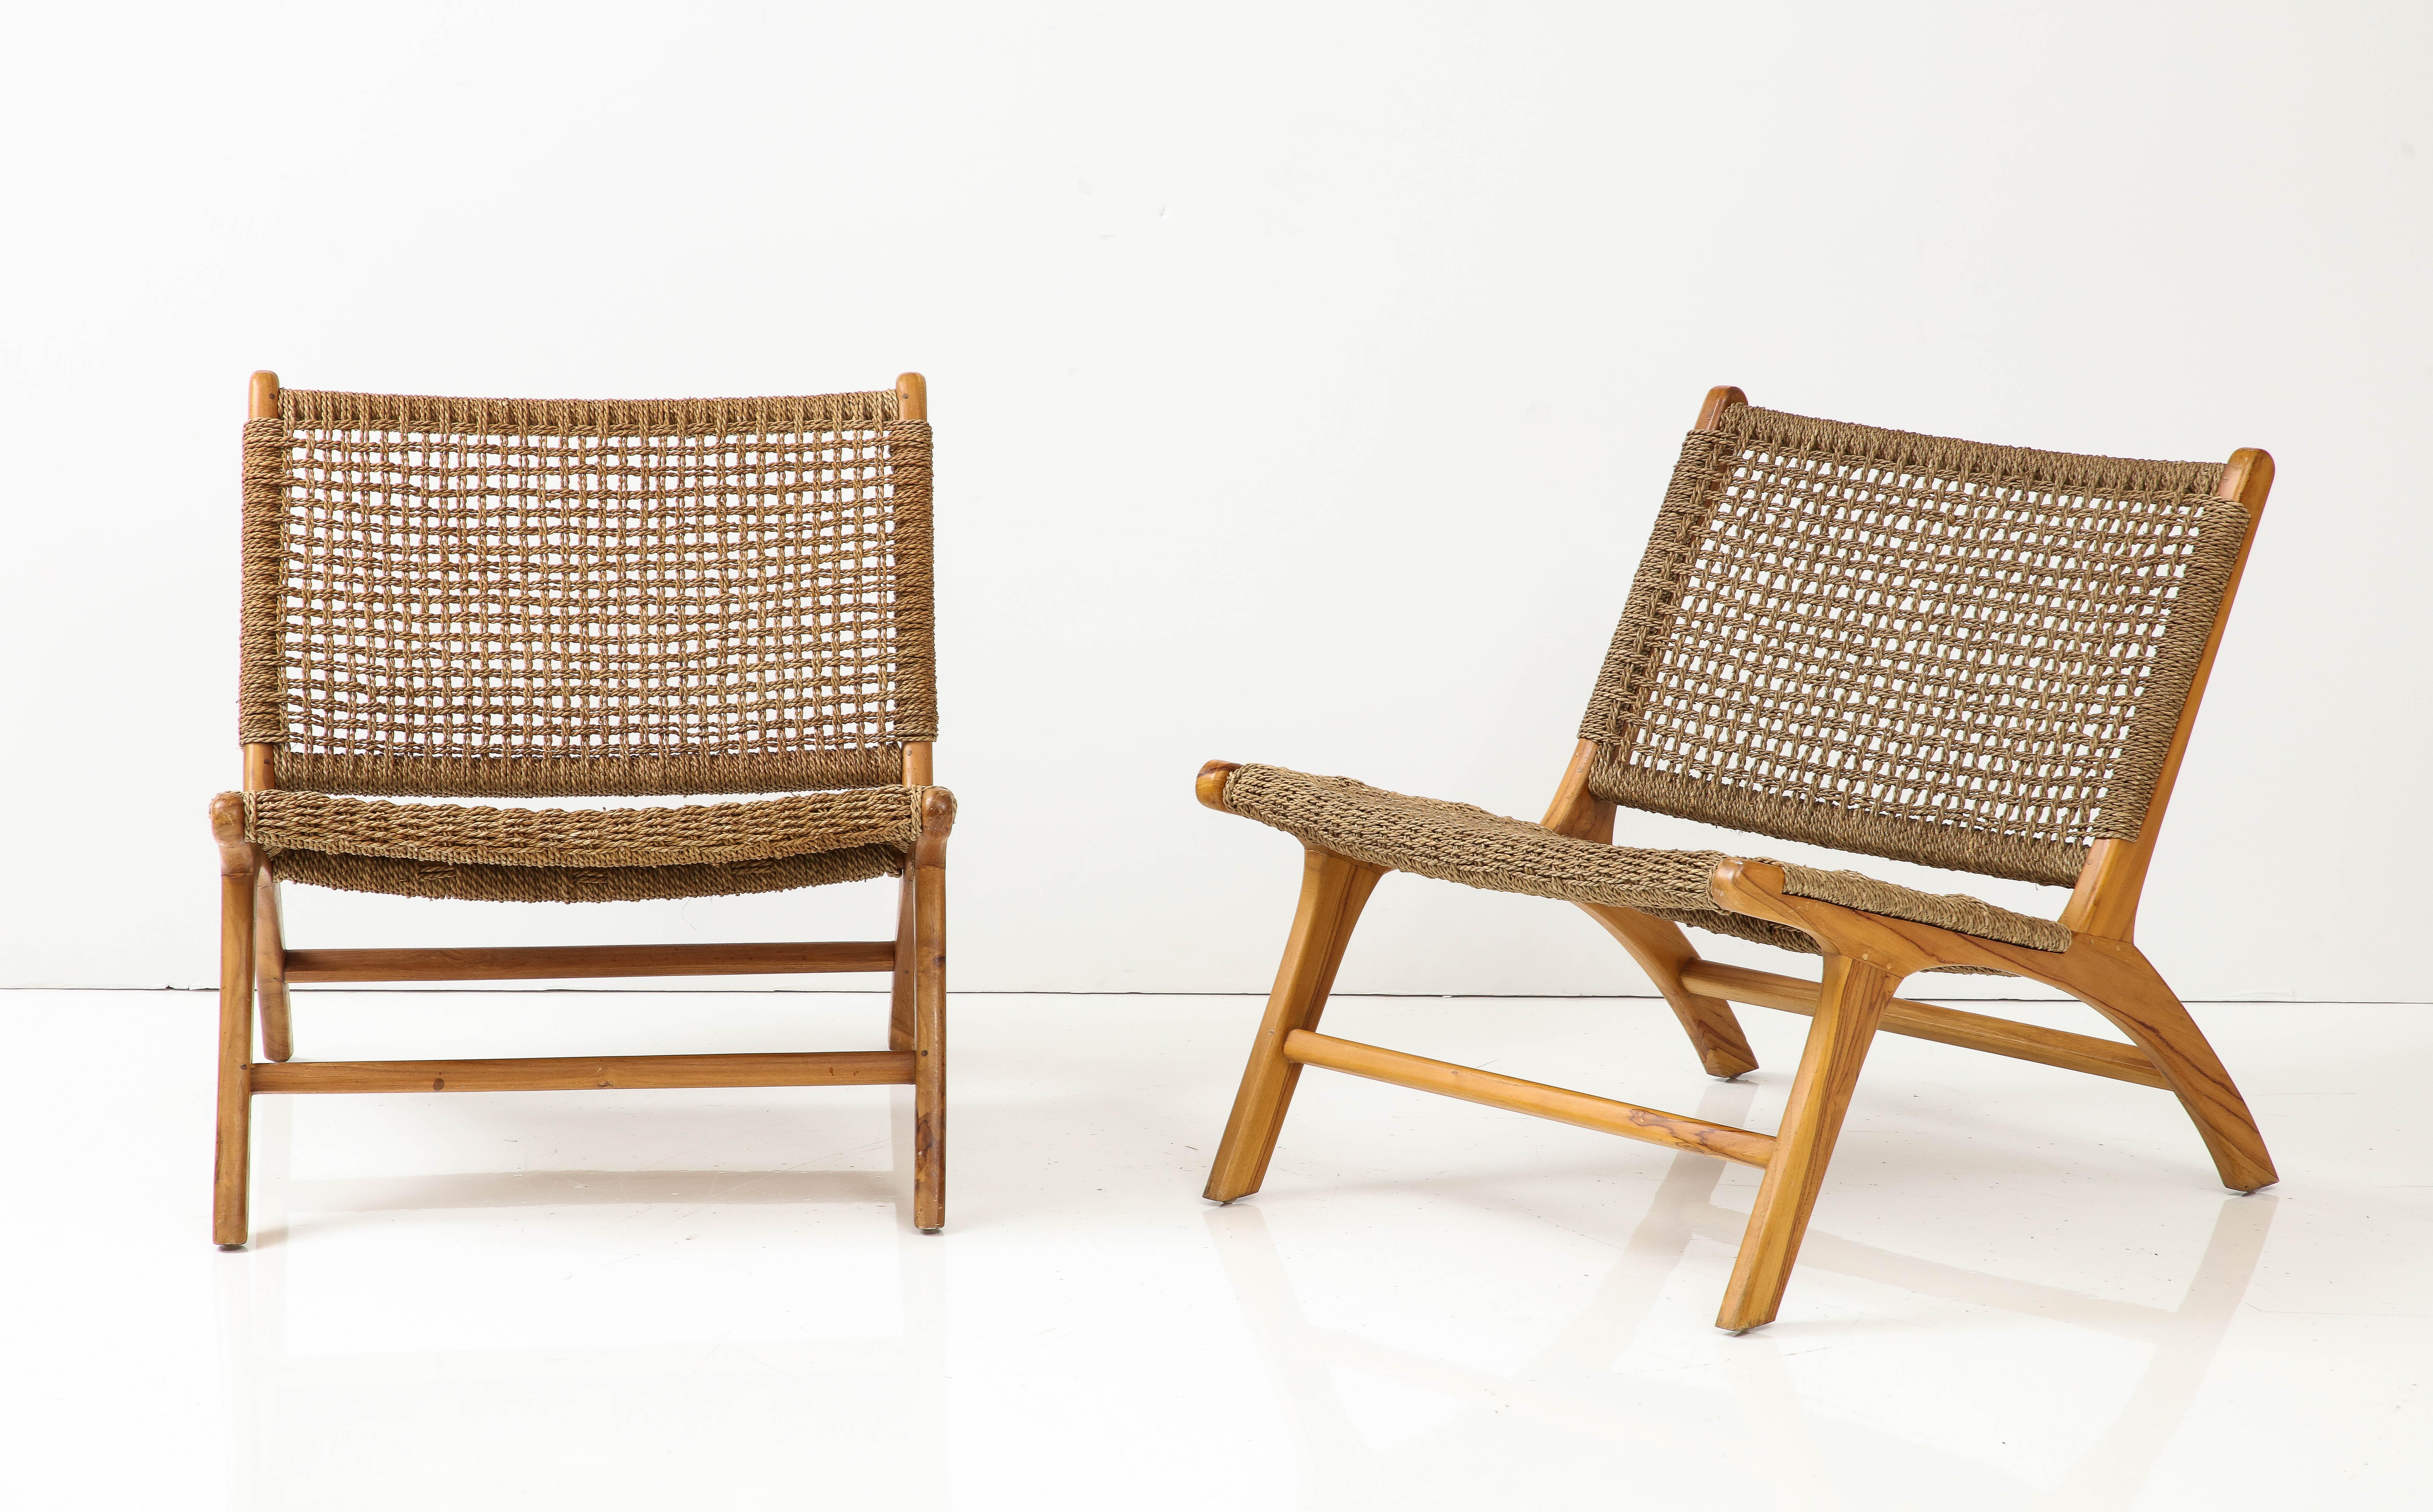 Modern Pair of Wood & Cord Chairs, France, C. 1990s, Signed, Numbered